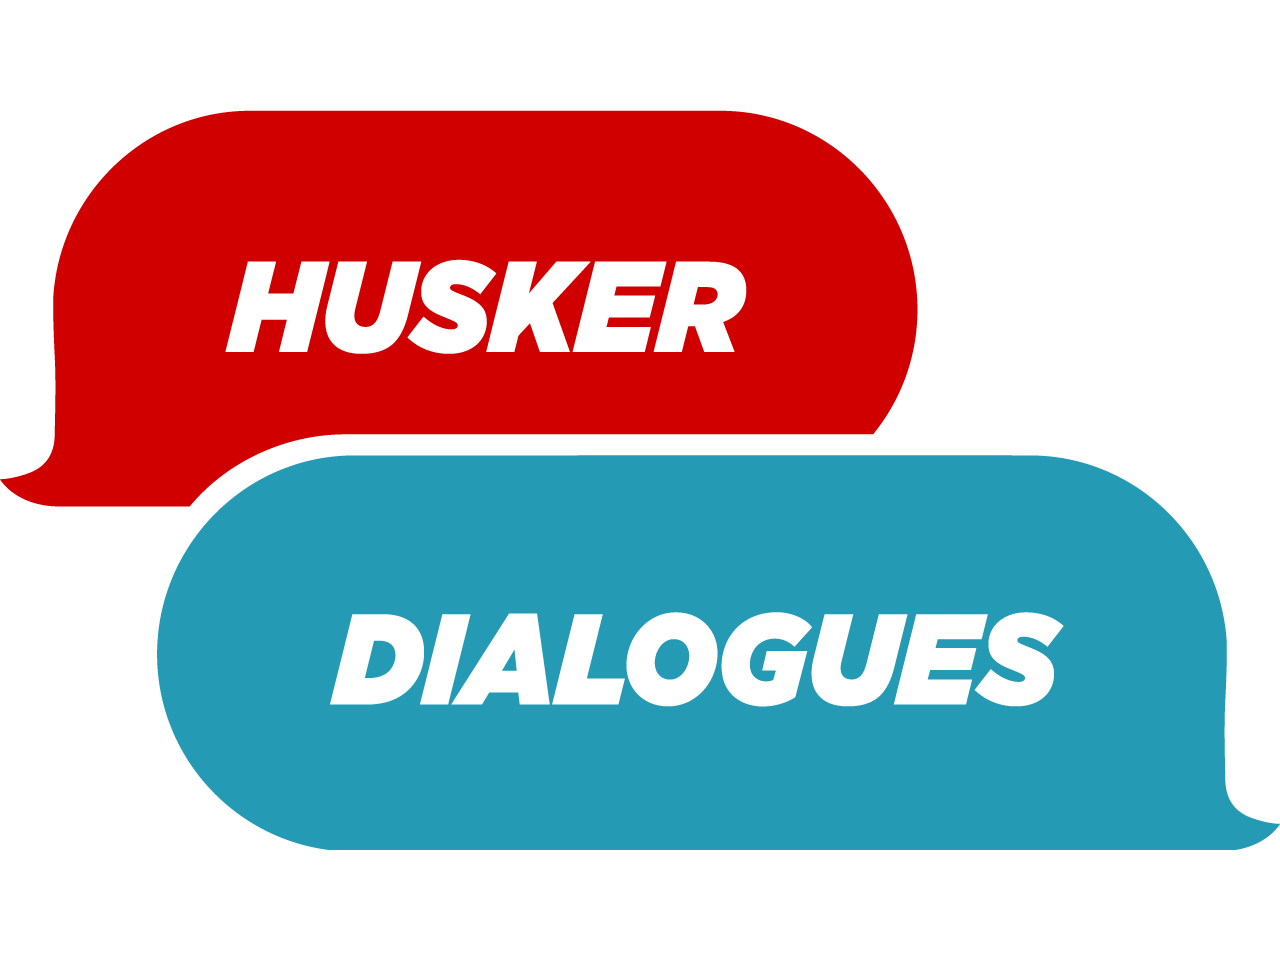 Husker Dialogues offers an opportunity to connect with other students through conversation.